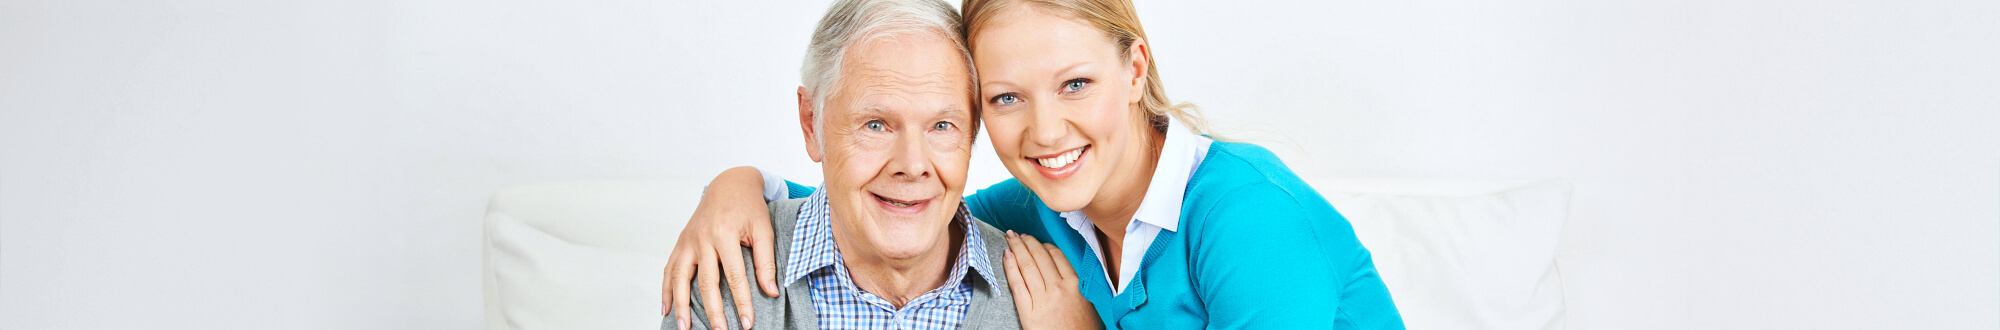 elderly and woman smiling